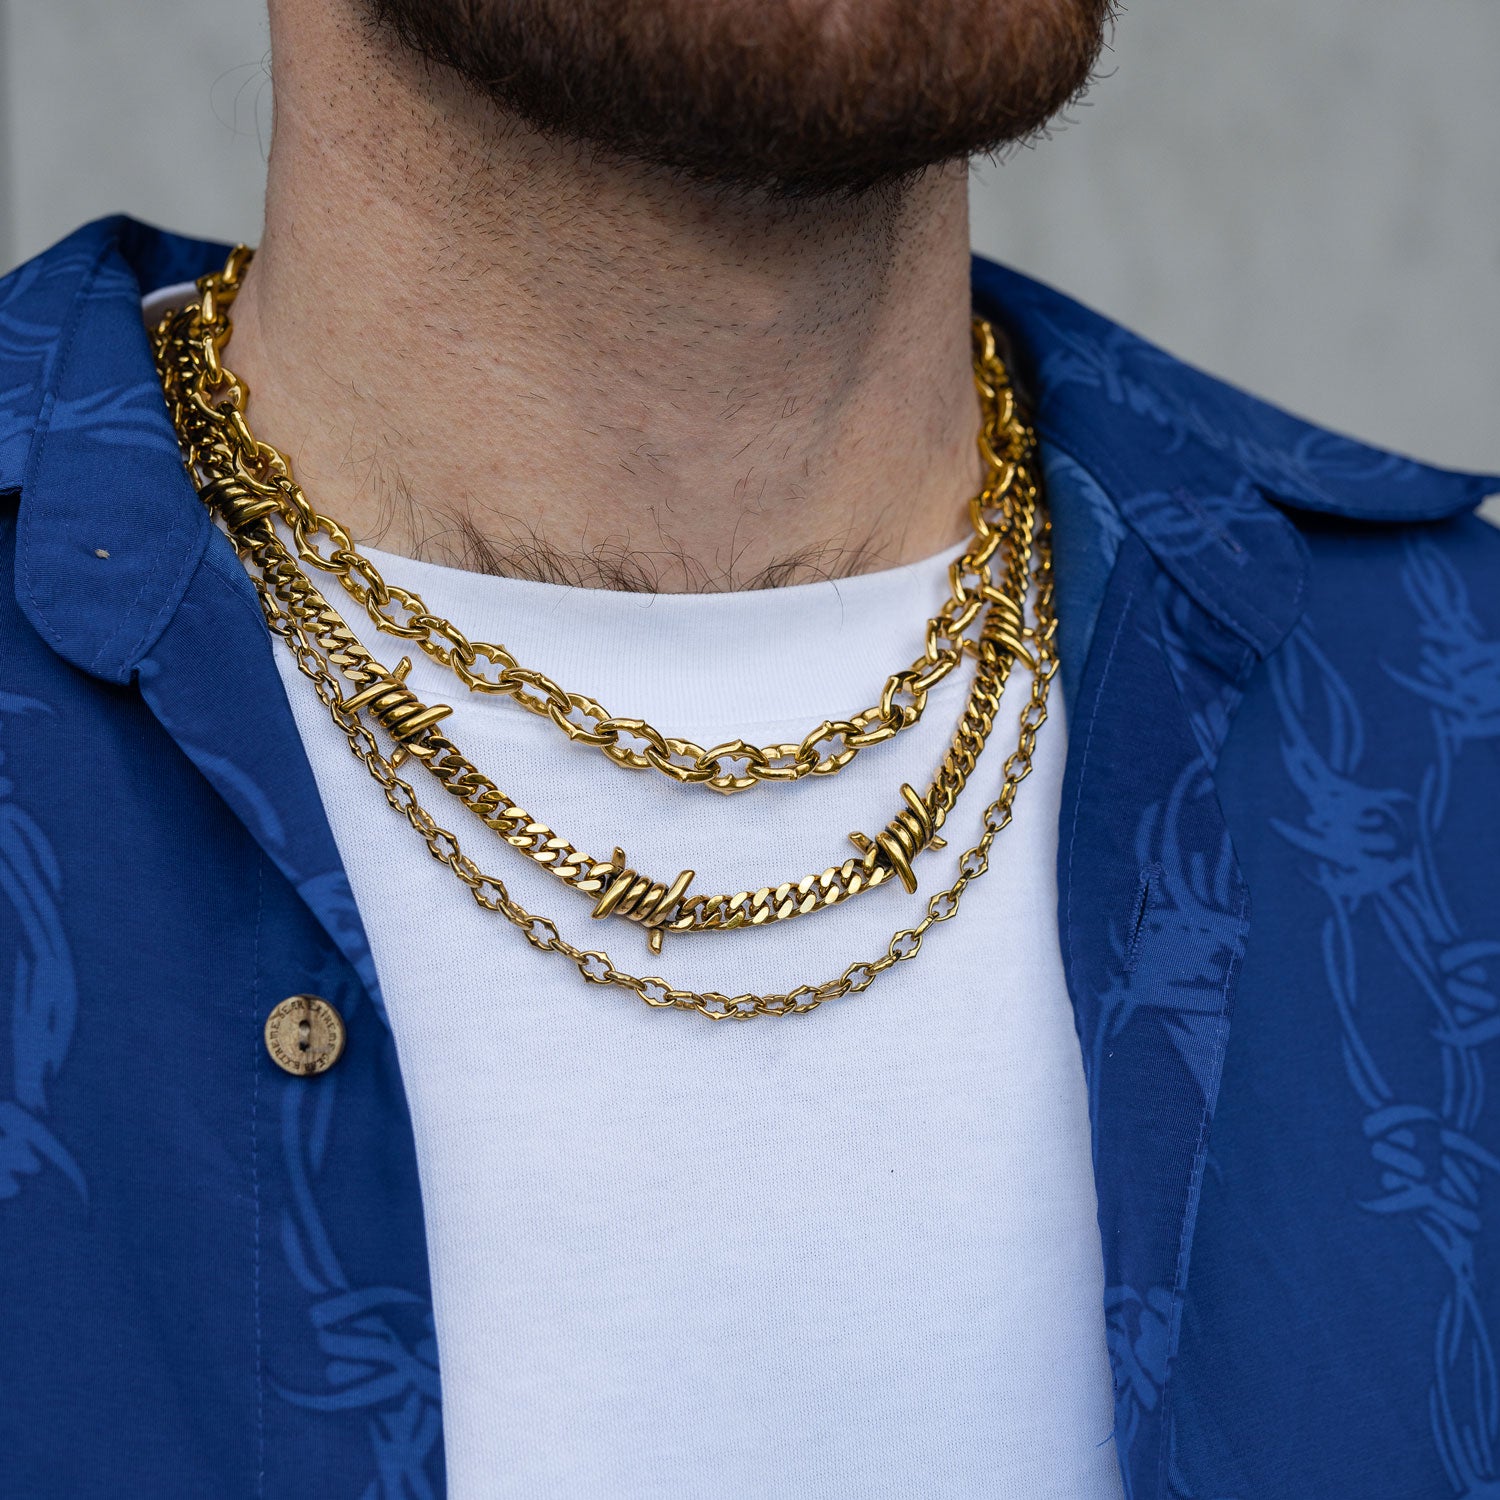 Gothic Gold chain set with spiked and barbed wire jewelry on mans neck by statement collective